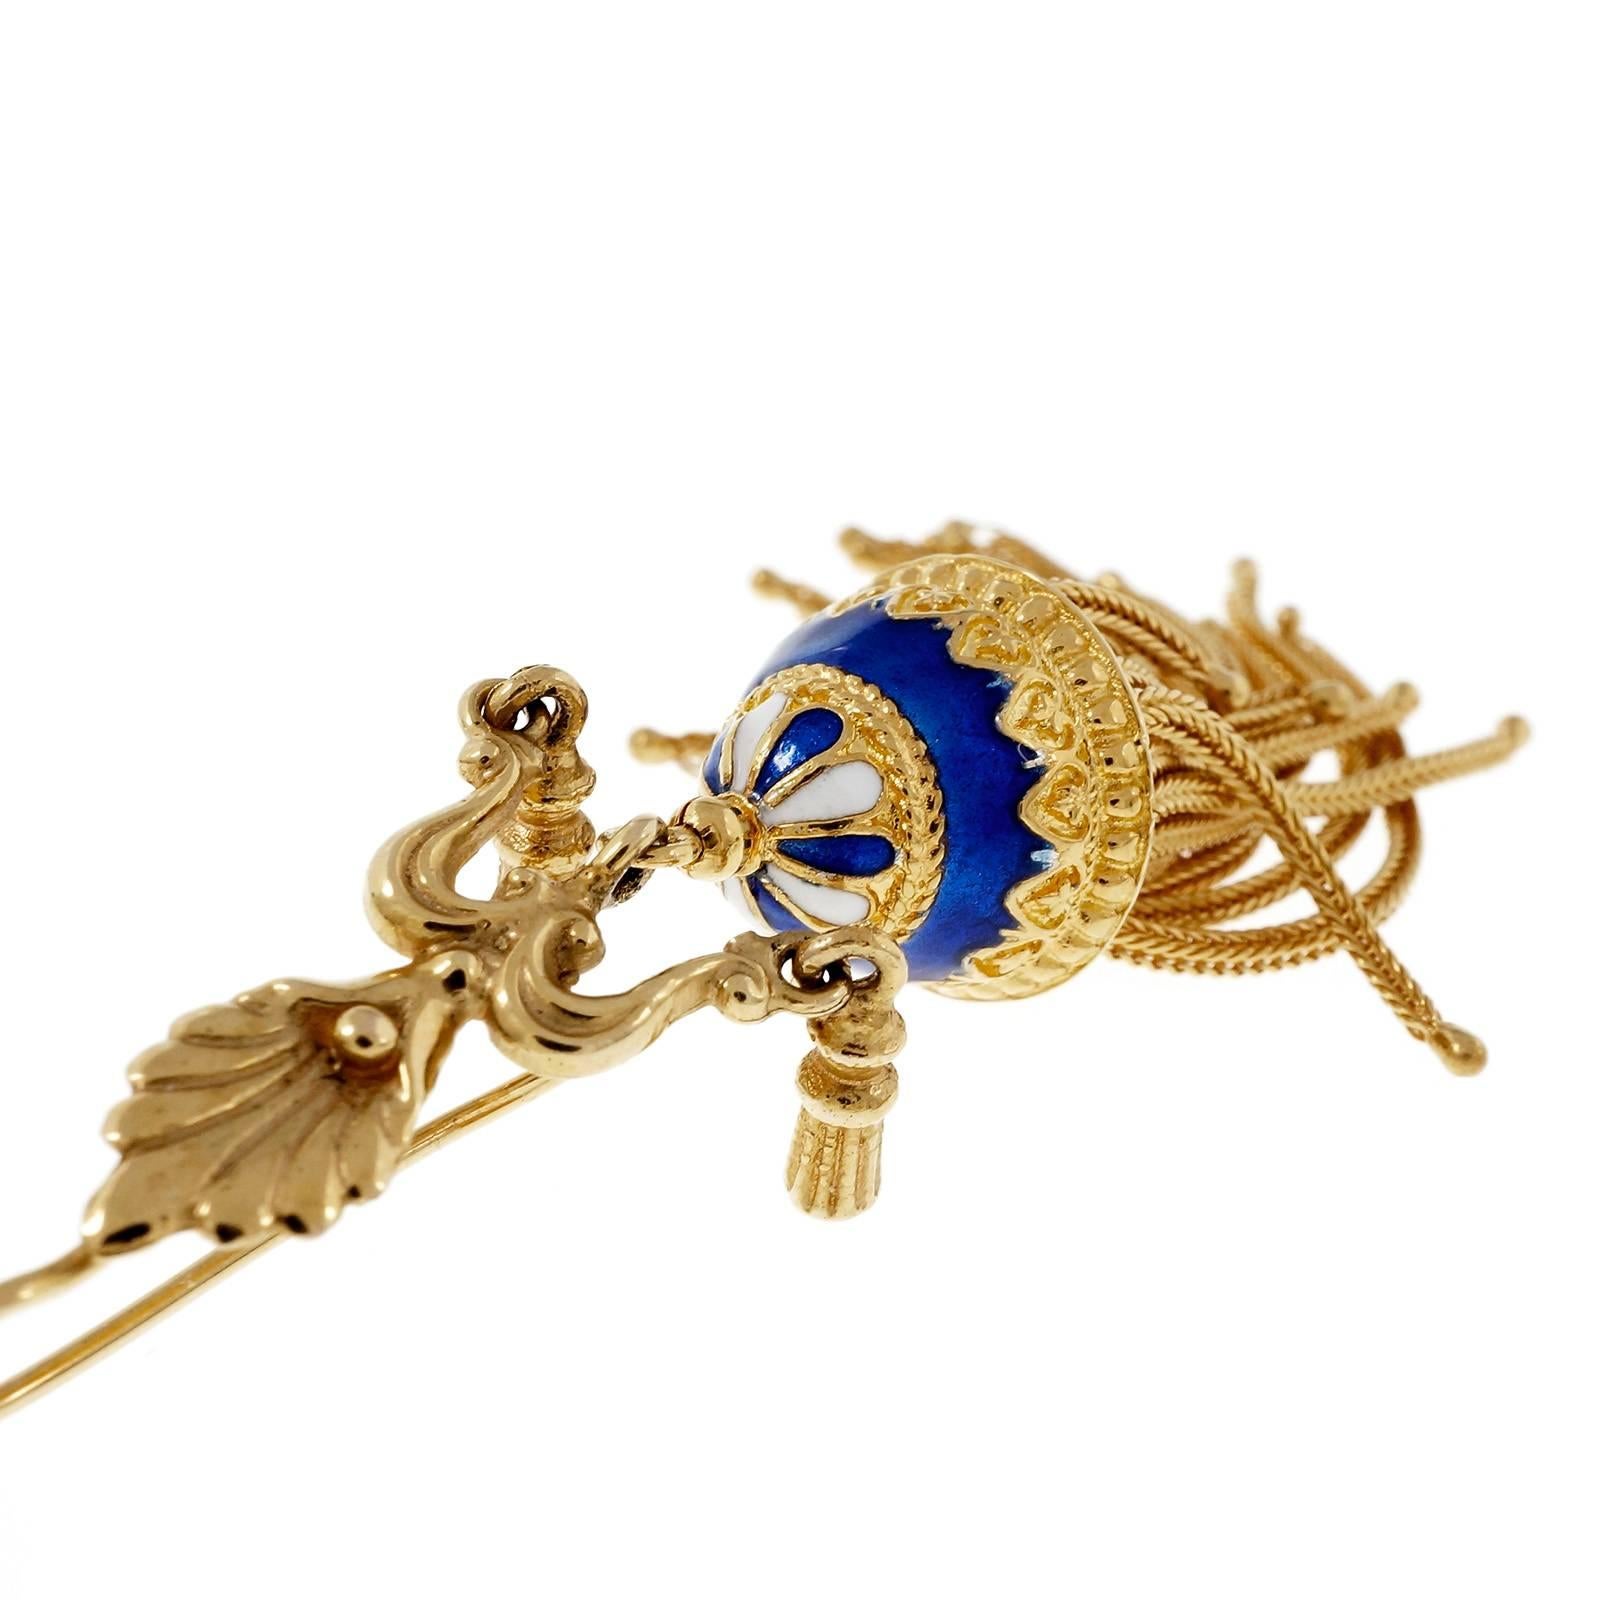 Large cobalt blue enamel 18k yellow gold tassel dangle earrings. 1930's

18k yellow gold
Tested: 18k
23.5 grams
Top to bottom: 78.17mm or 3.08 inches
Width: 16.16mm or .64 inches
Depth: 14.05mm
